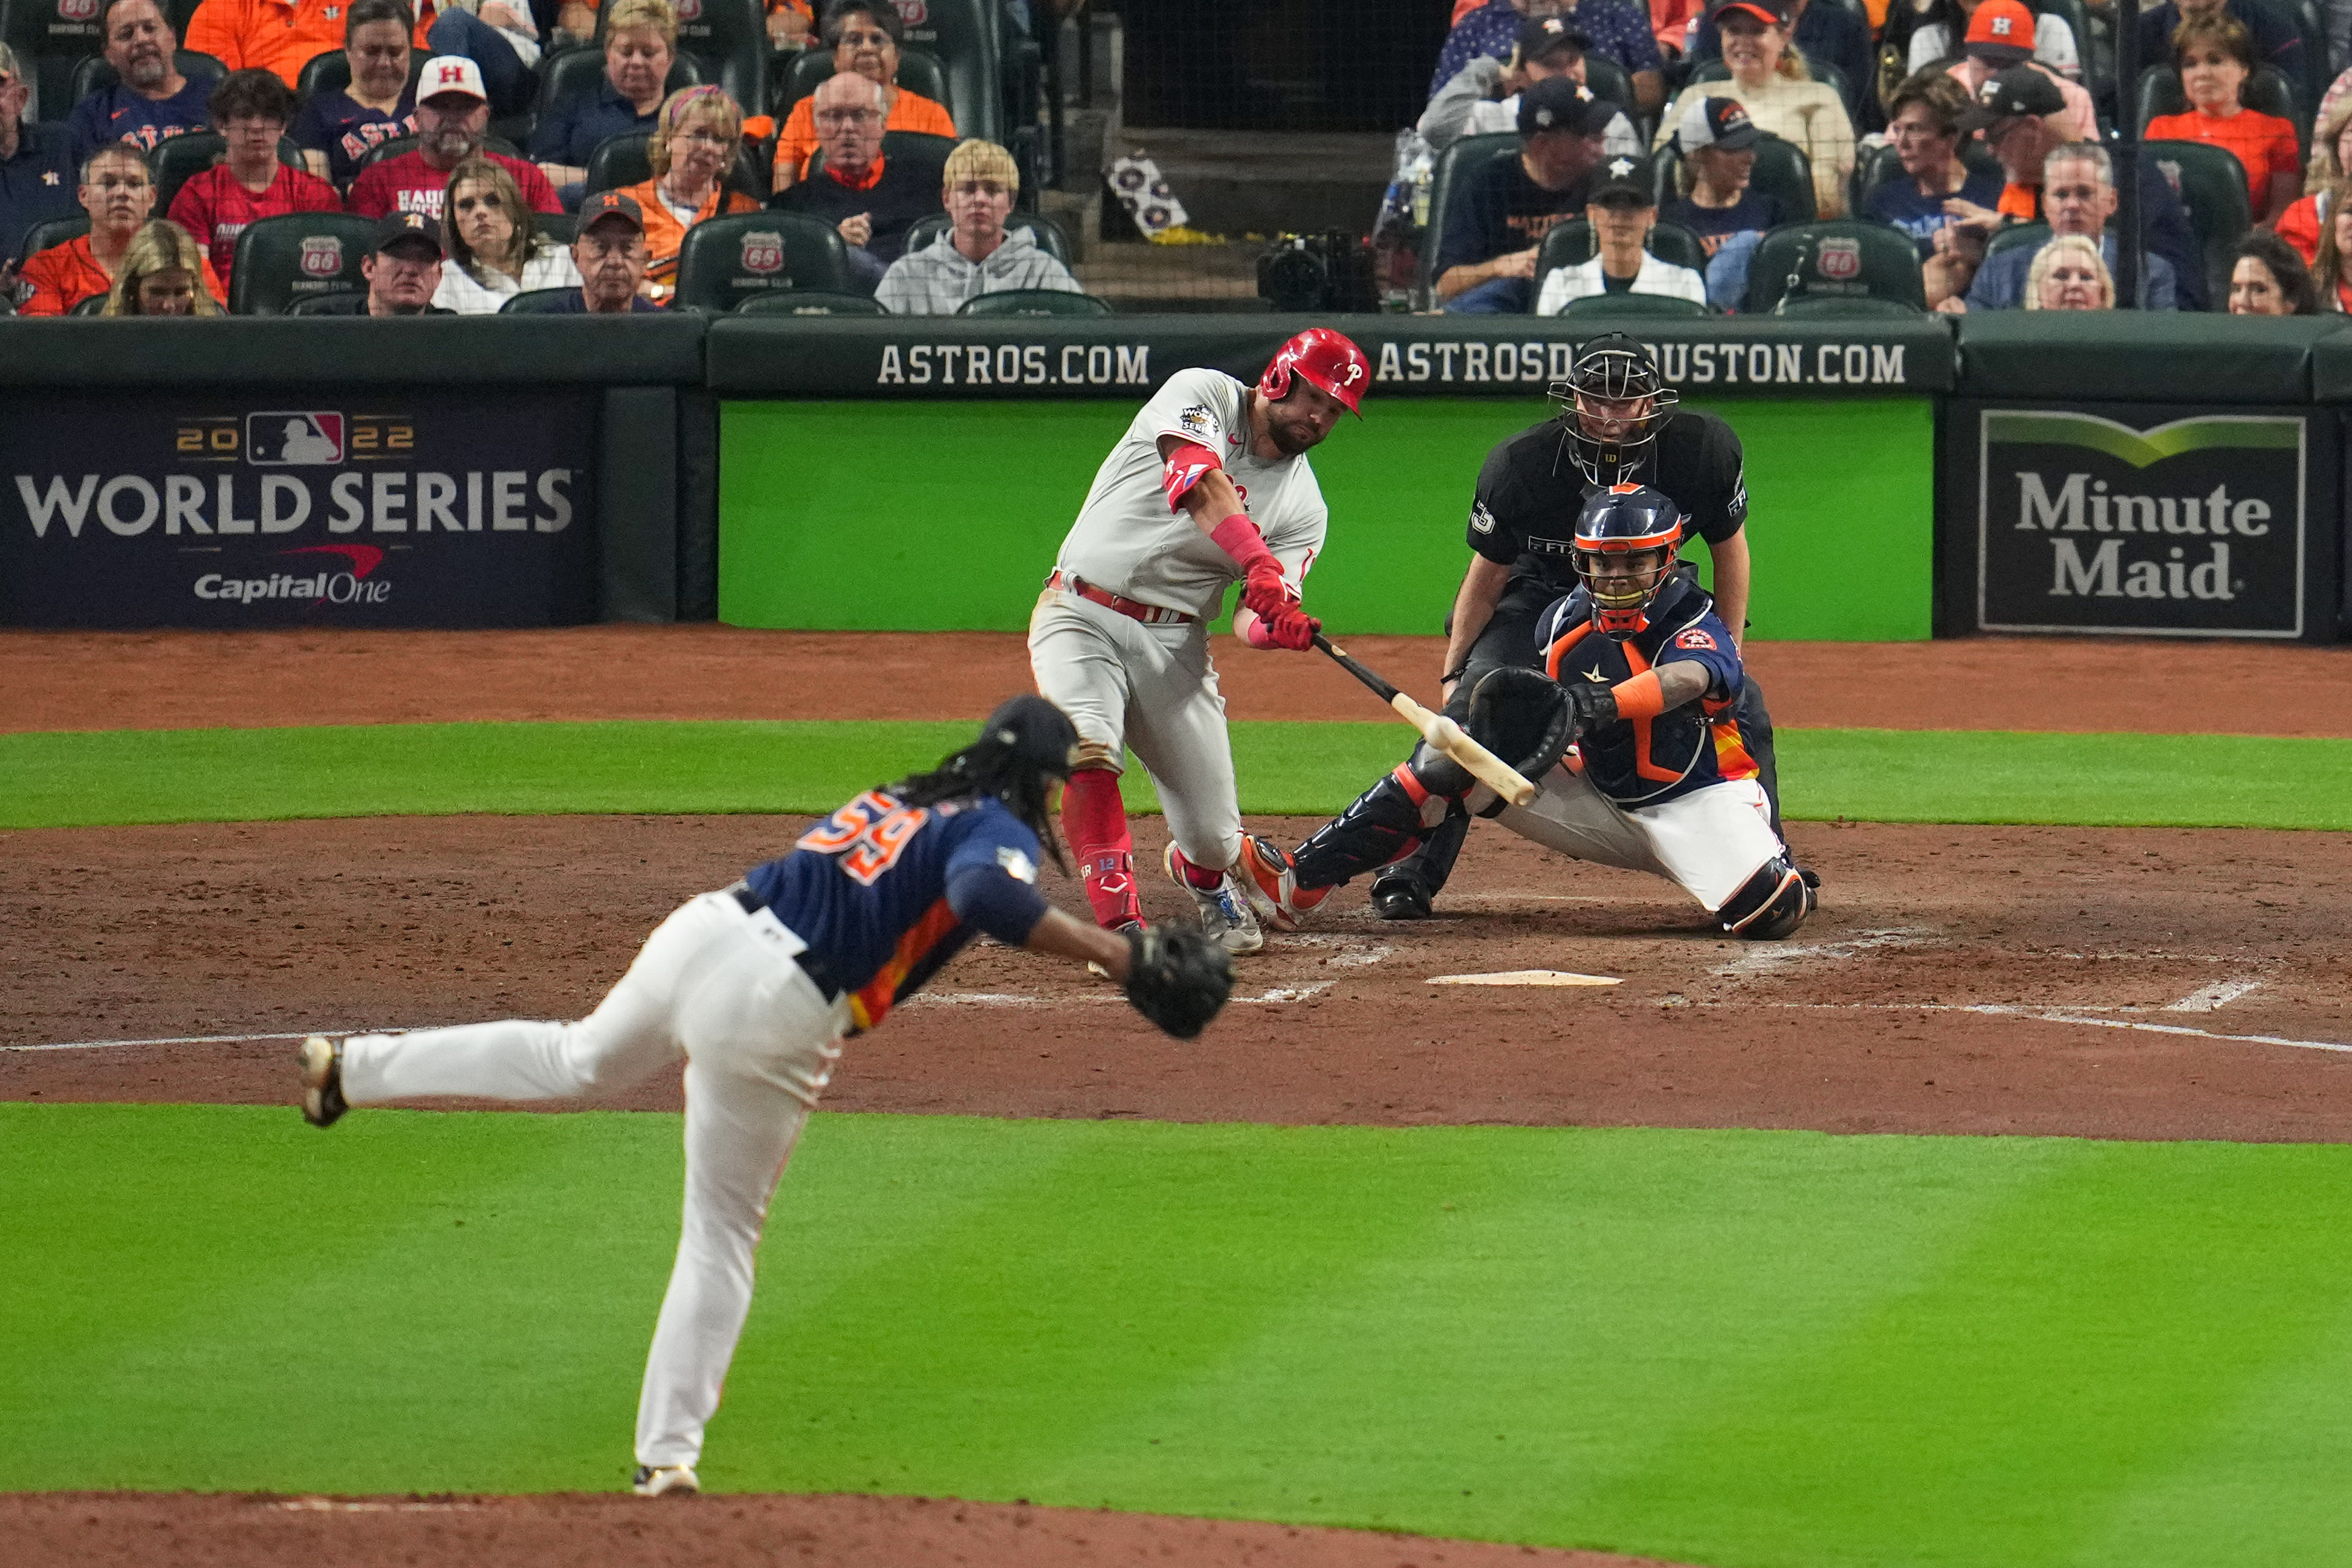 Left fielder Kyle Schwarber (left in the back) of the Philadelphia Phillies hits a solo home run during the sixth inning in Game 6 of the MLB World Series against the Houston Astros at Minute Maid Park in Houston, Texas, November 5, 2022. /CFP